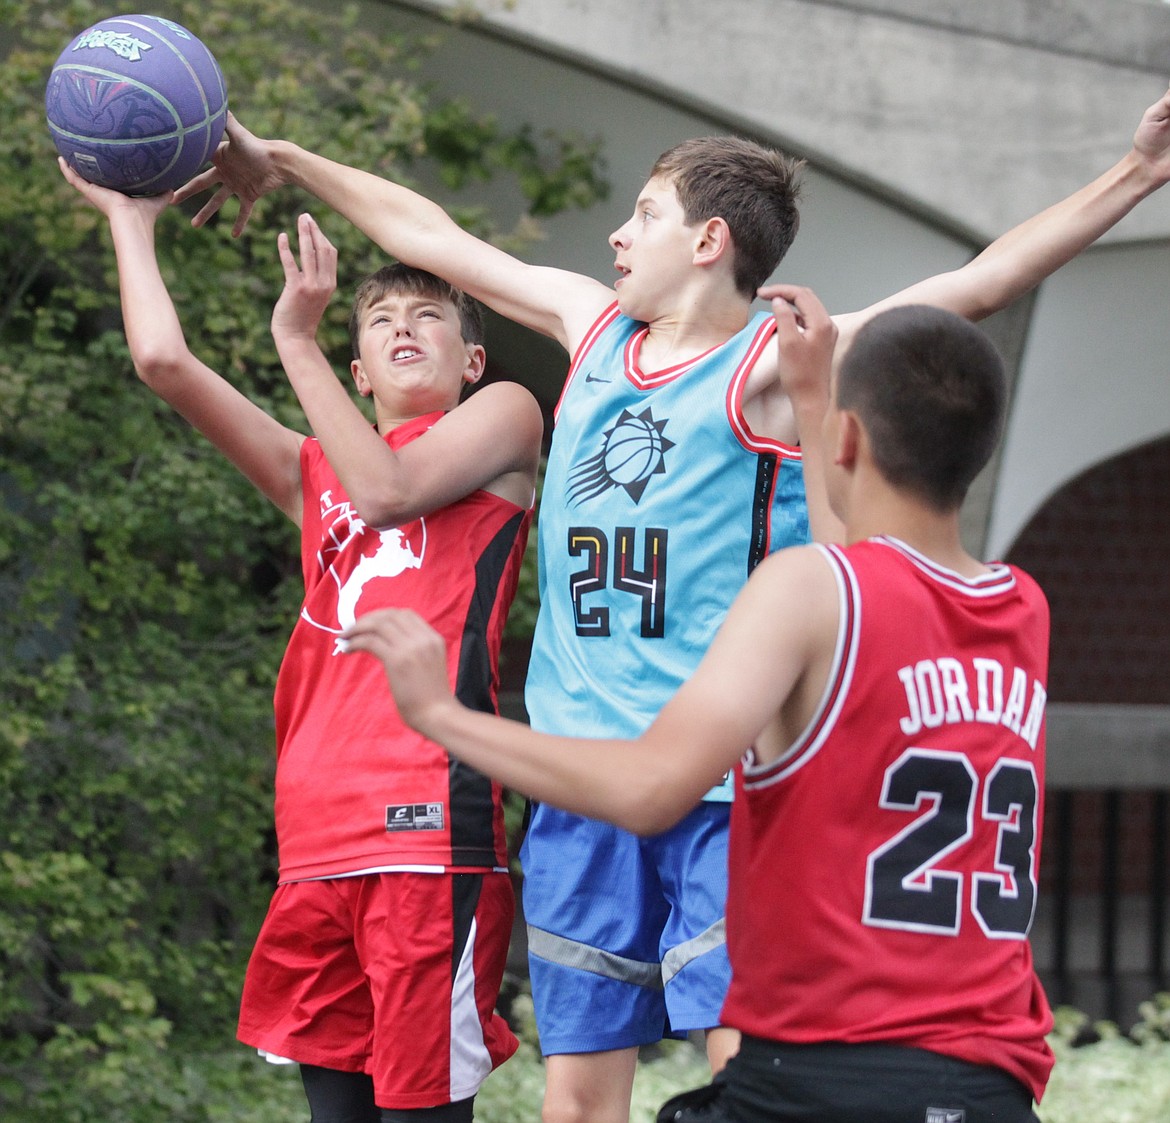 JASON ELLIOTT/Press
Sandpoint Hoopers player Bennett Nieman goes up for a shot during an opening round game against Wild Catz at the Hoopfest 3-on-3 basketball tournament in Spokane on Saturday.